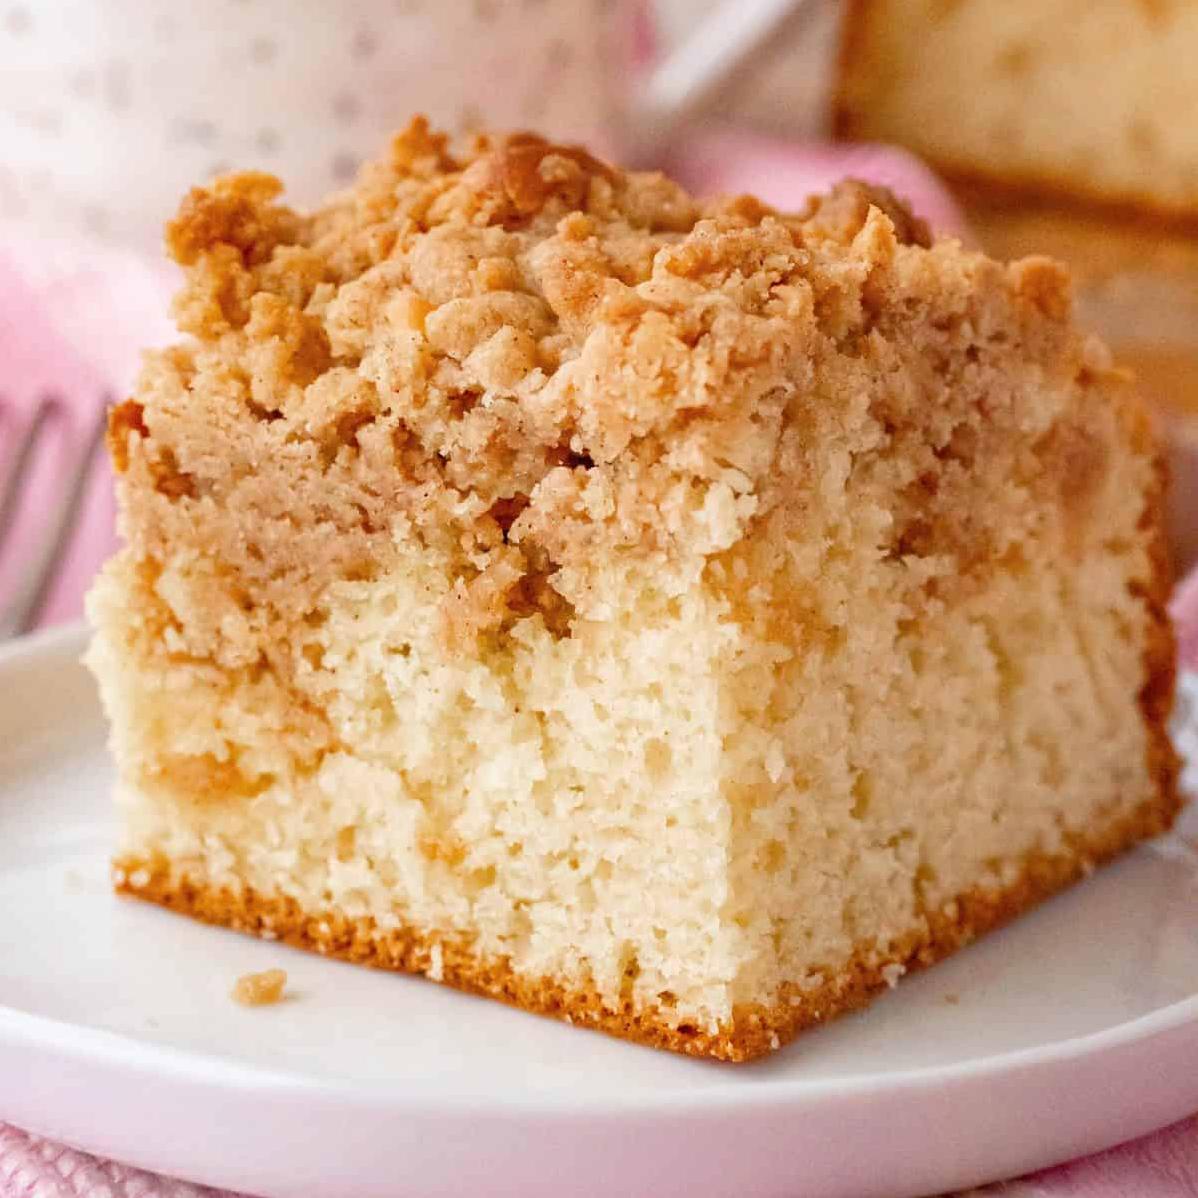  Each bite is filled with pockets of cinnamon-sugar streusel that’s sure to make you smile.